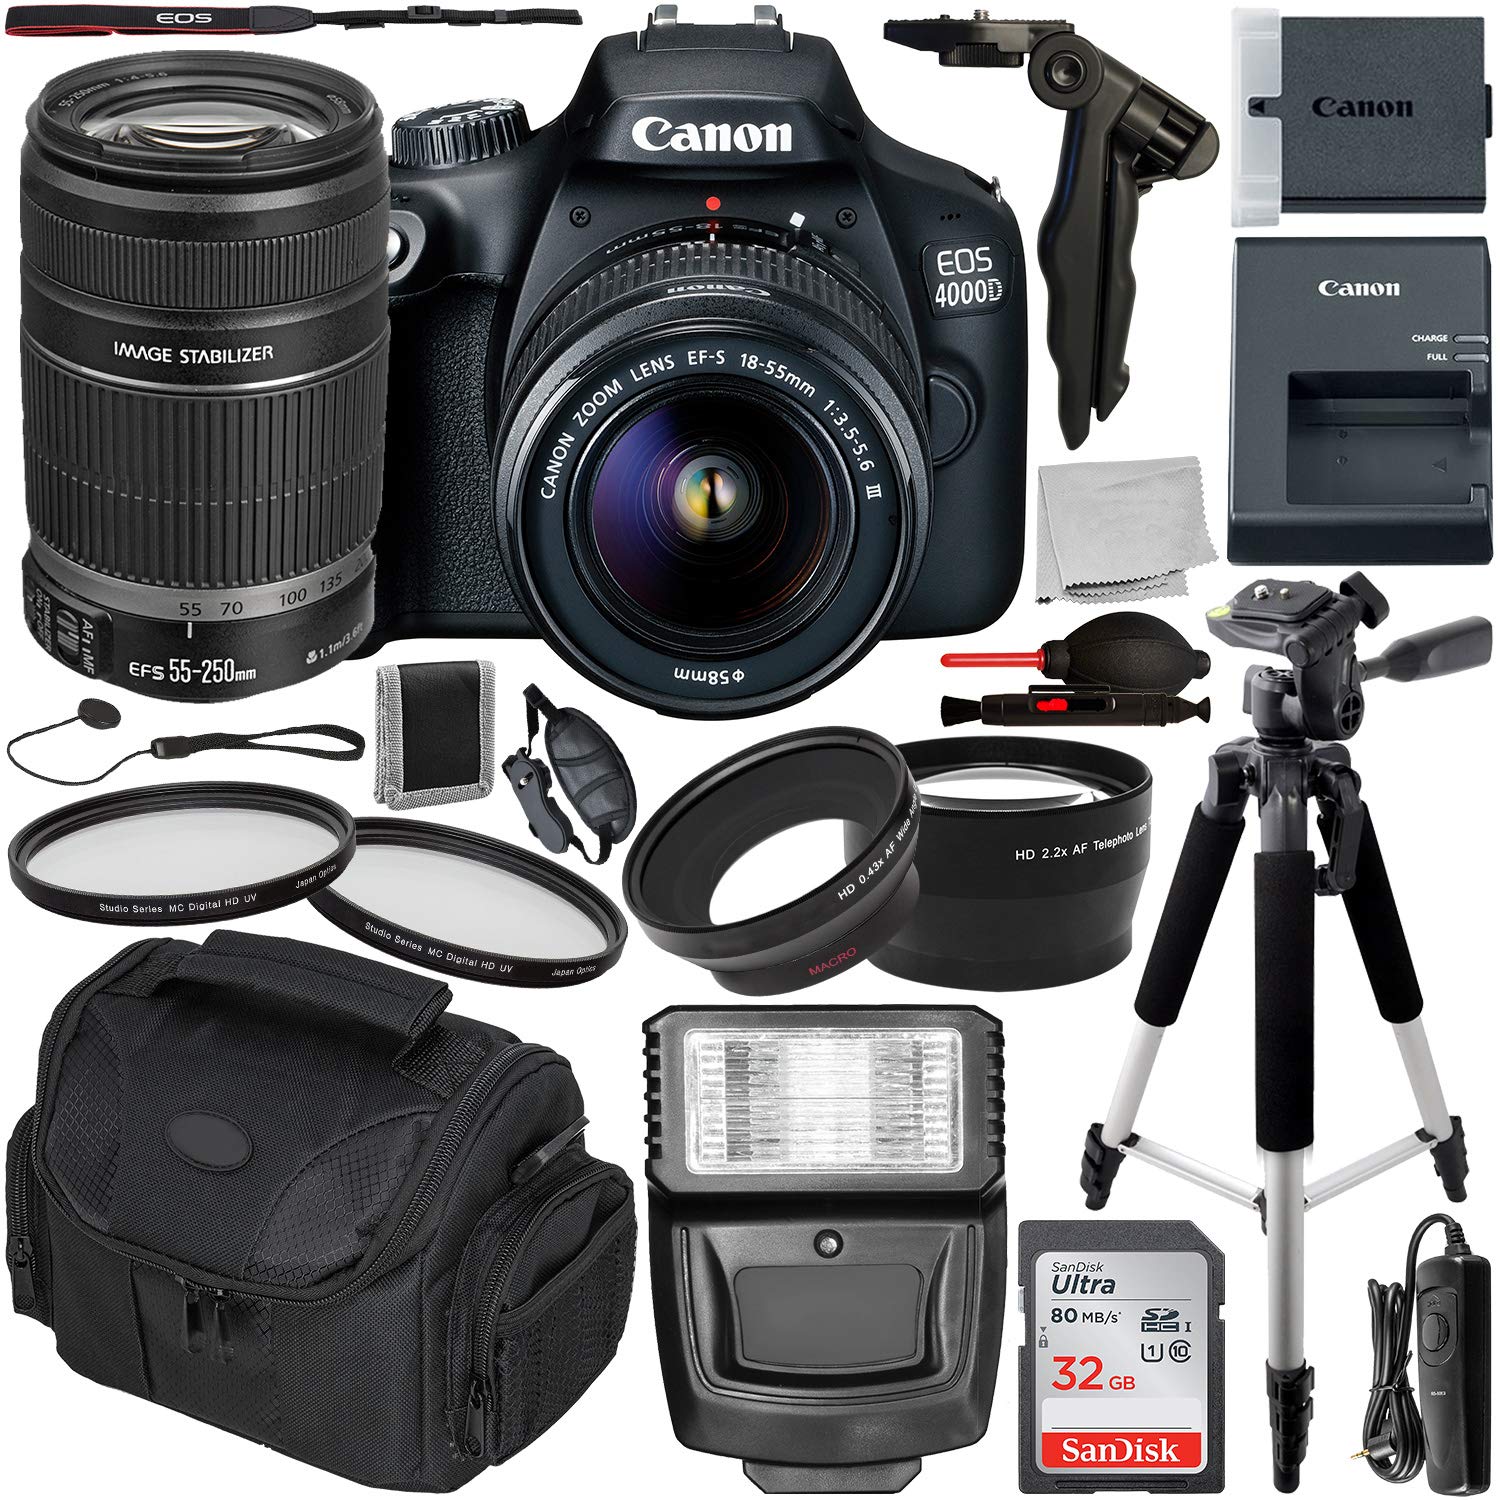 Canon EOS 4000D DSLR Camera with EF-S 18-55mm III Lens - 2628C003 & 55-250mm f/4-5.6 IS II Lens (Open Box) & Deluxe Accessory Bundle